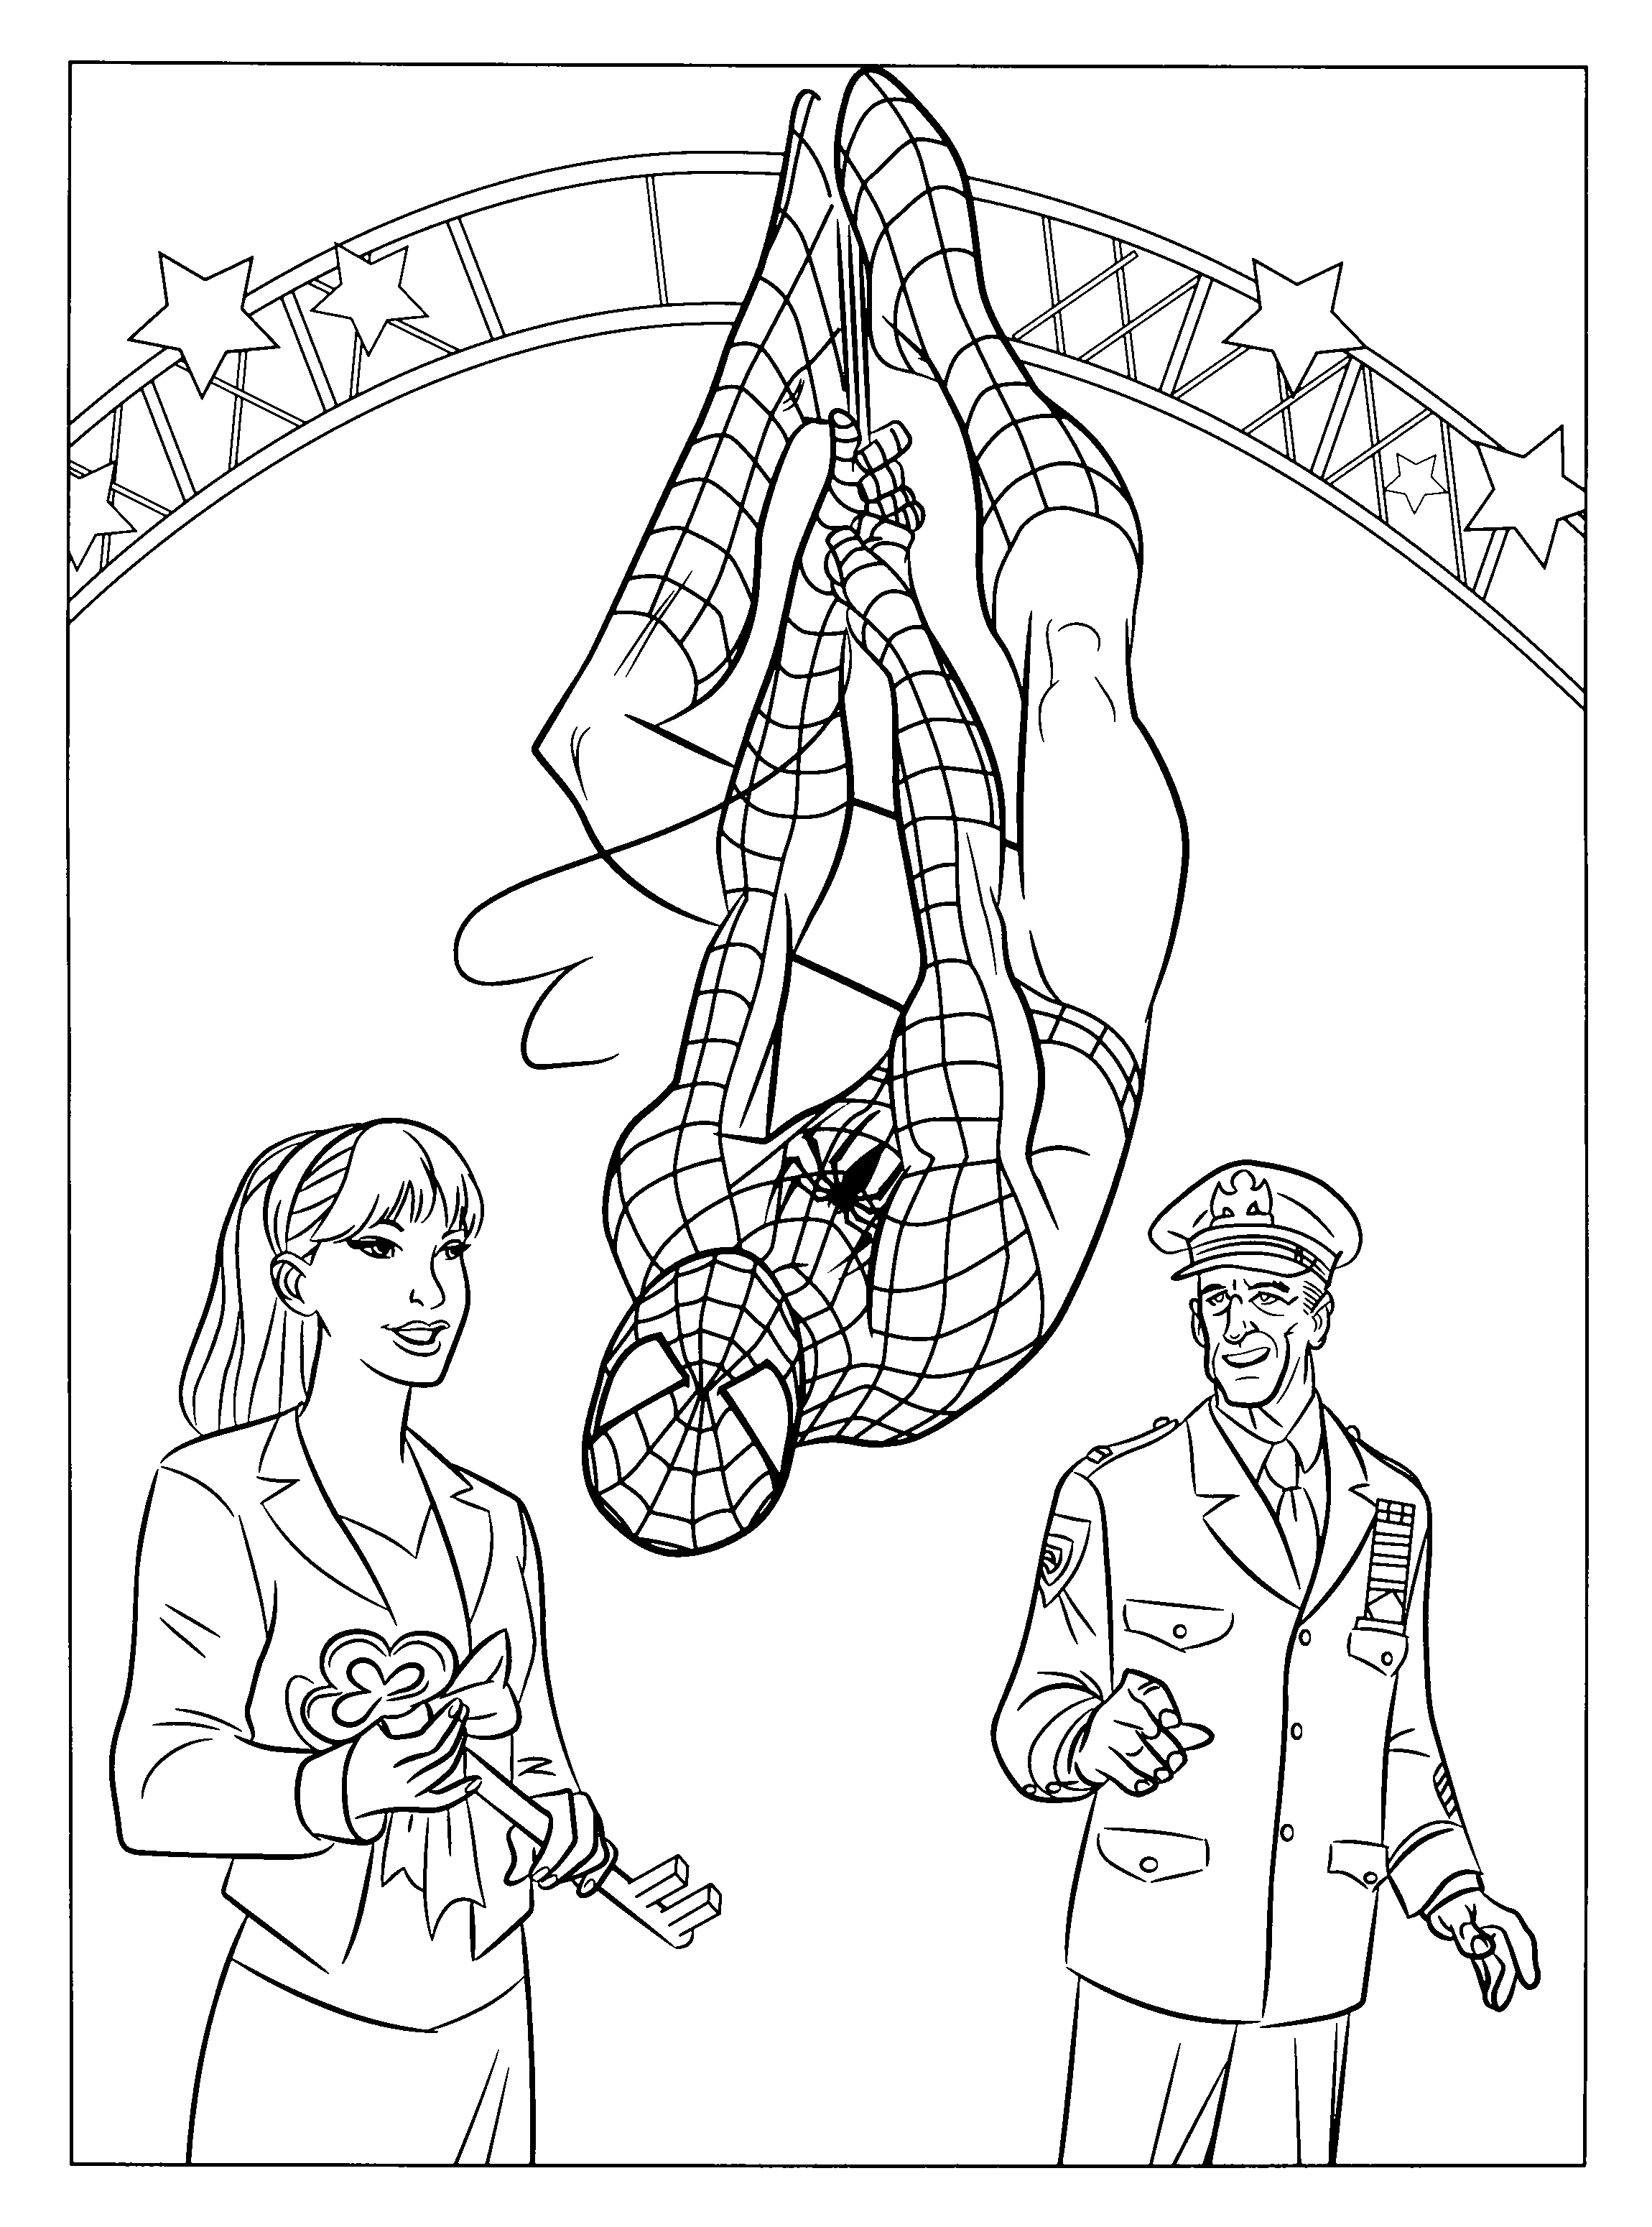 Coloring Page - Spiderman 3 coloring pages 4